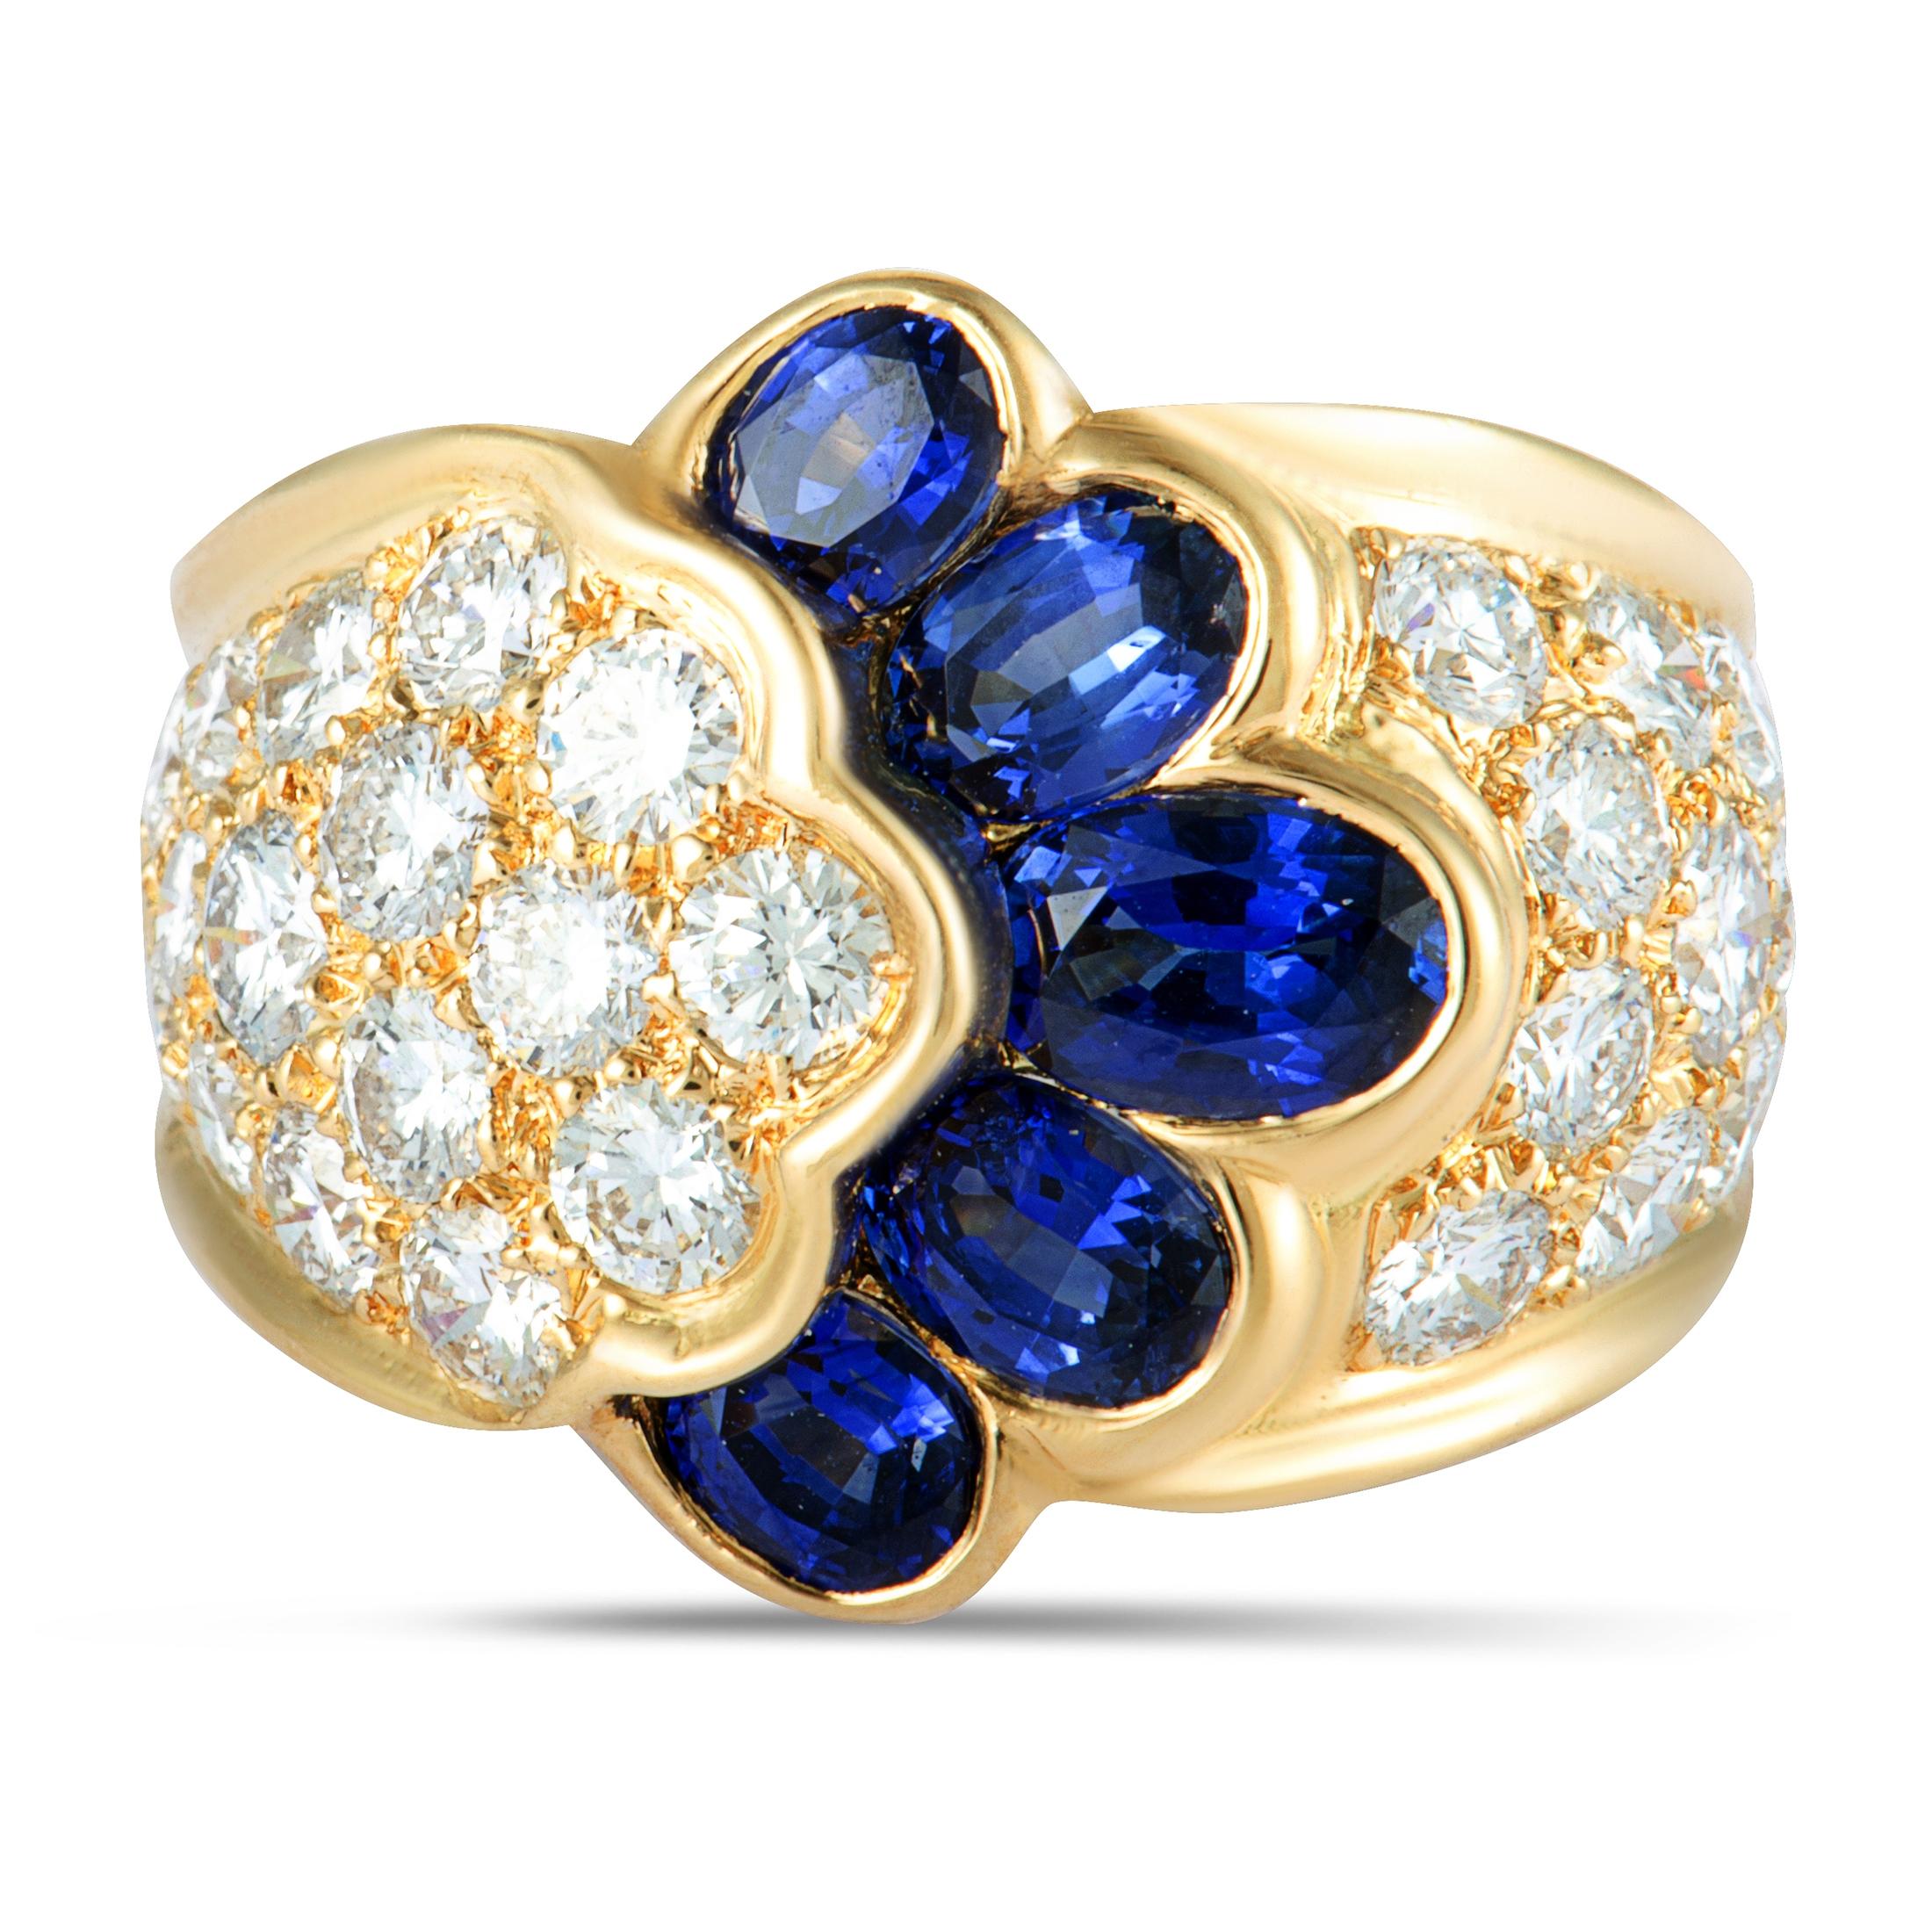 Van Cleef & Arpels Diamond and Sapphire Yellow Gold Wide Band Ring Size 6.25 1